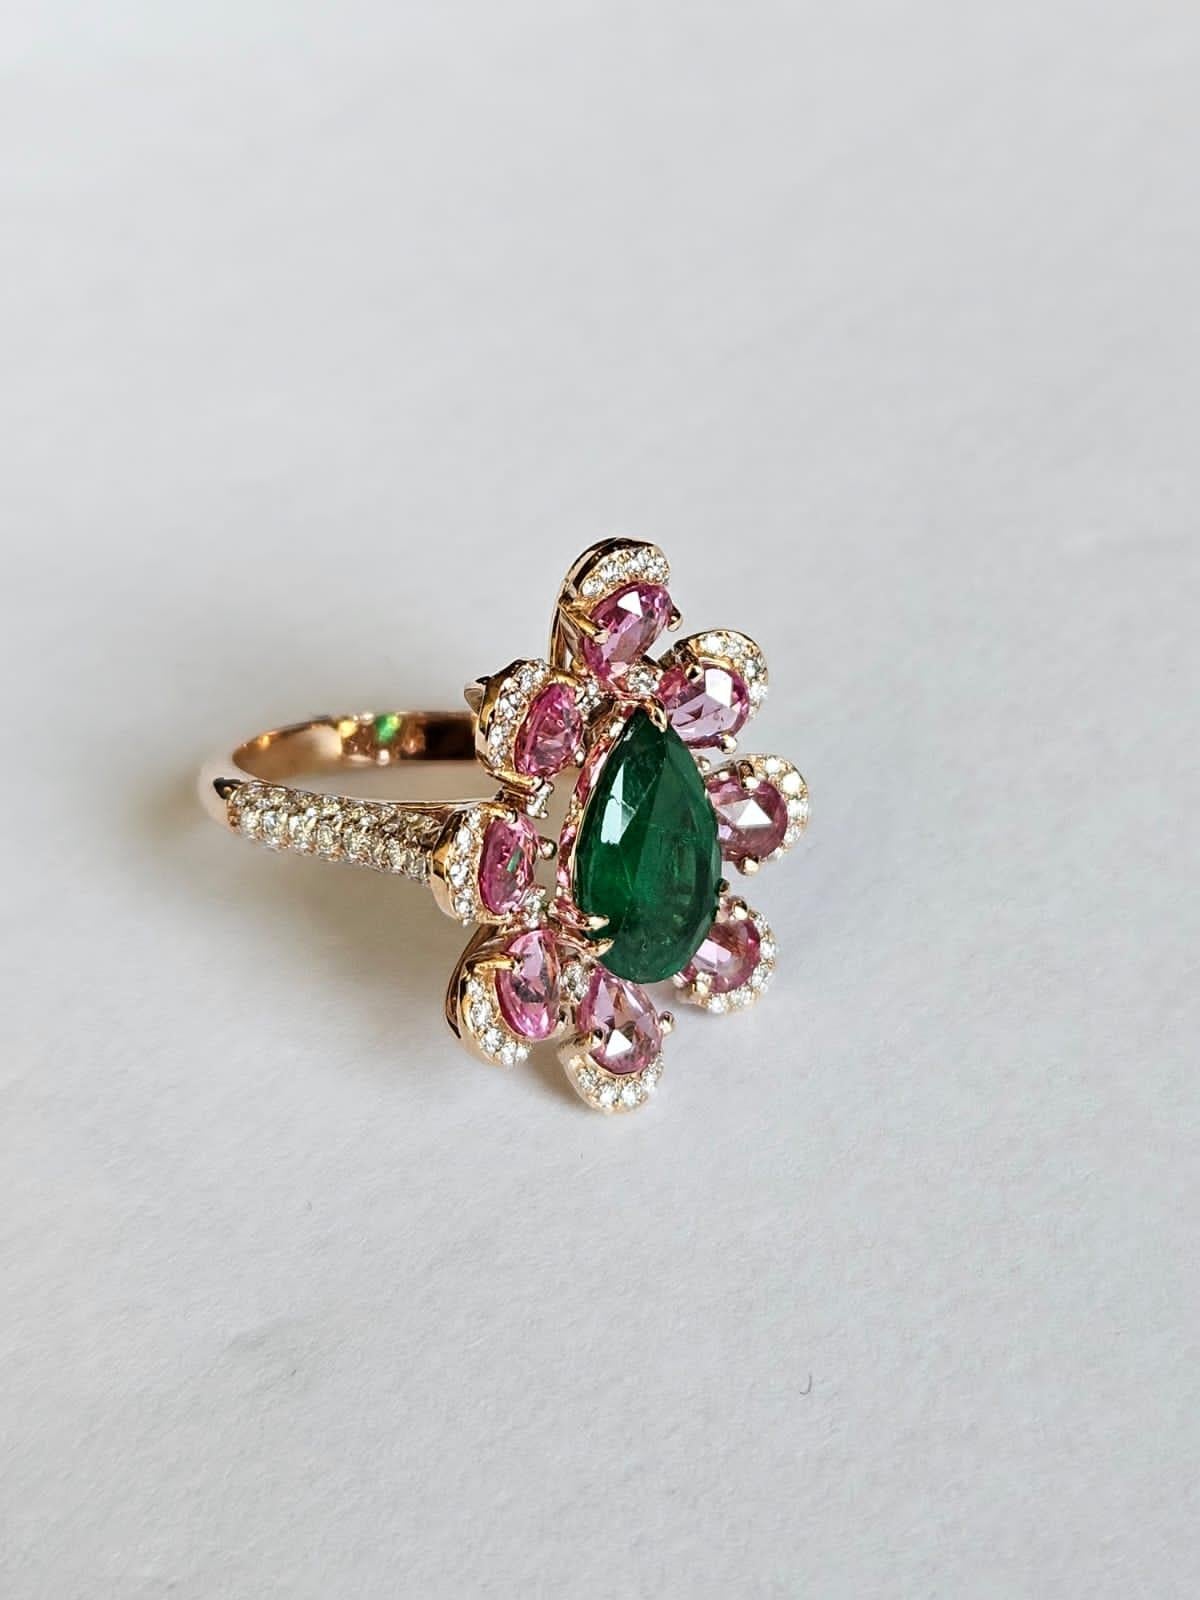 Pear Cut Set in 18K Gold, natural Zambian Emerald, Pink Sapphire & Diamonds Cocktail Ring